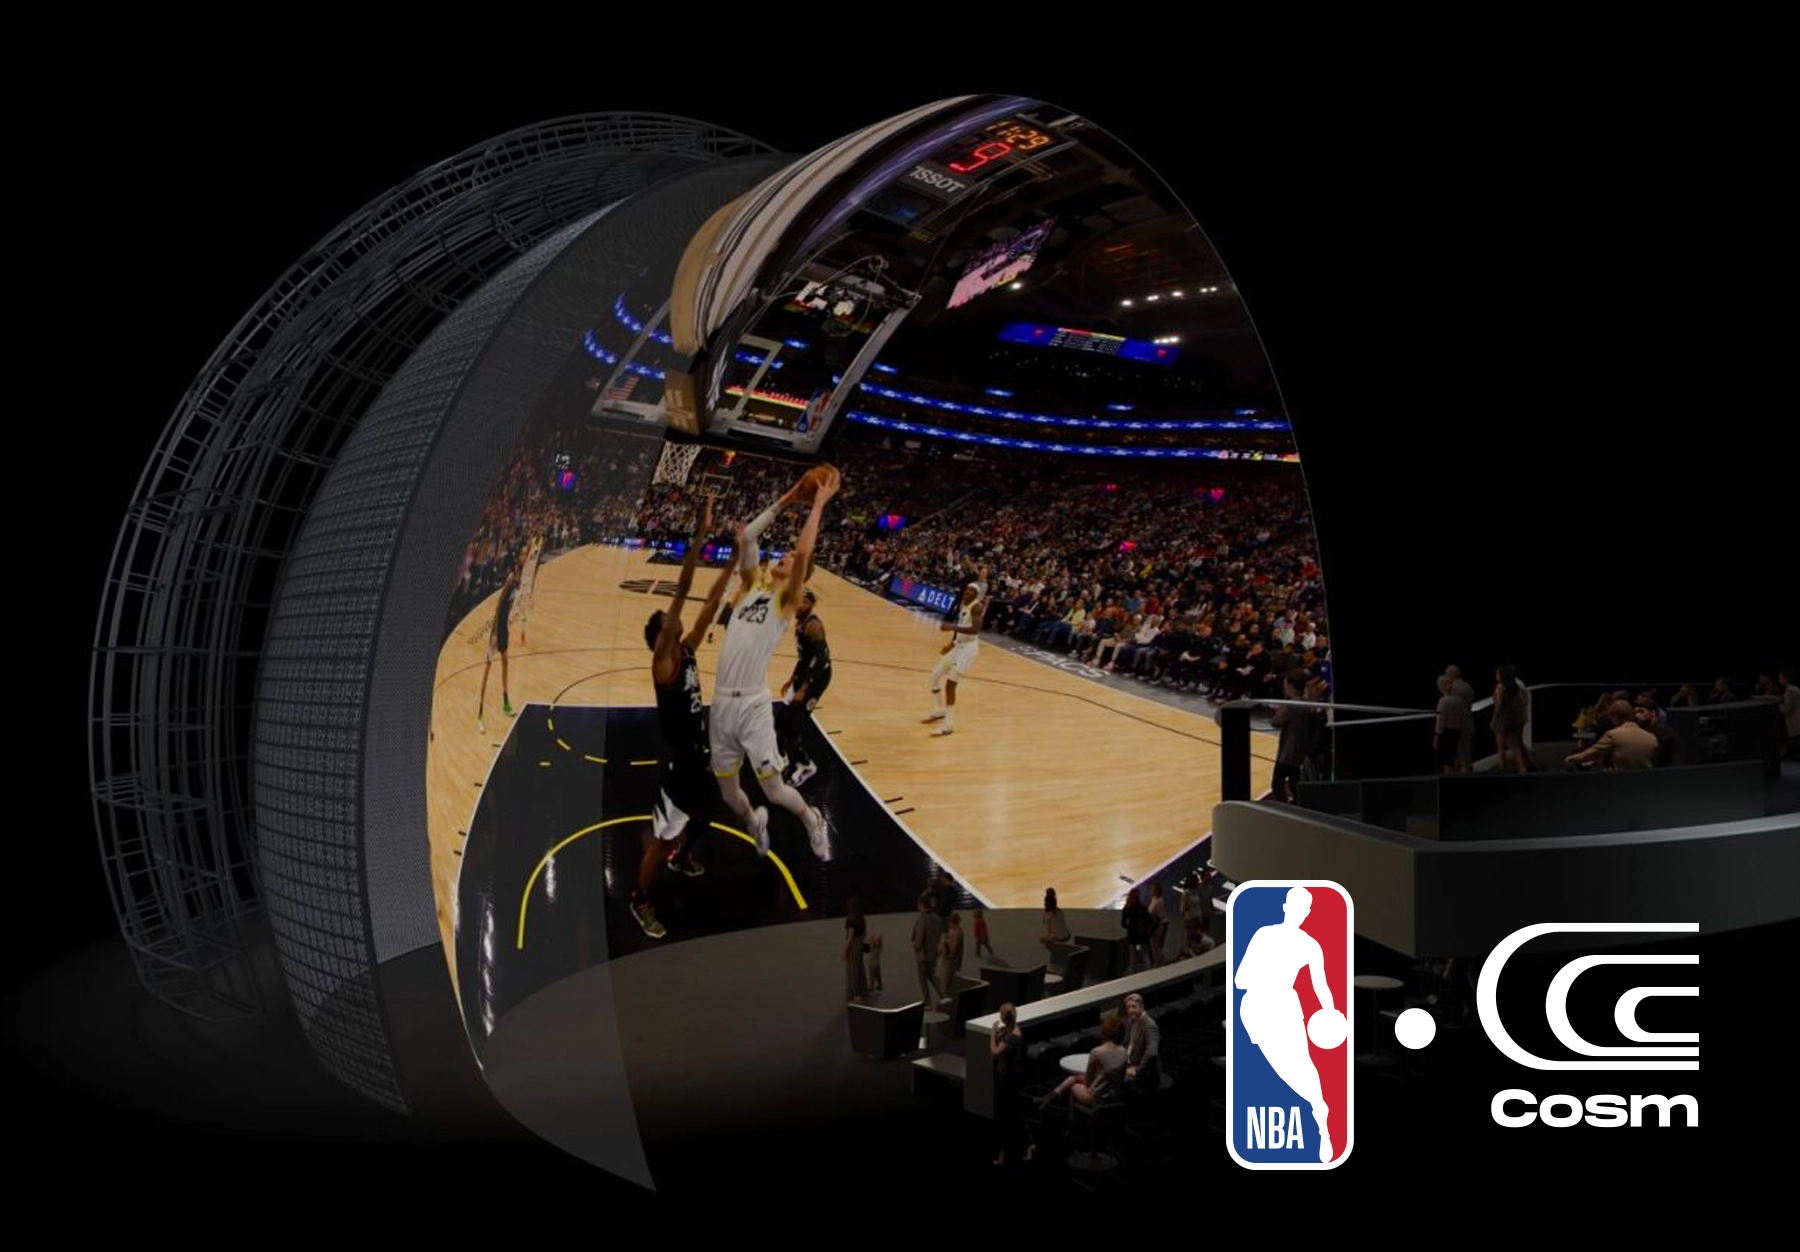 NBA Experience Rendering in The Dome